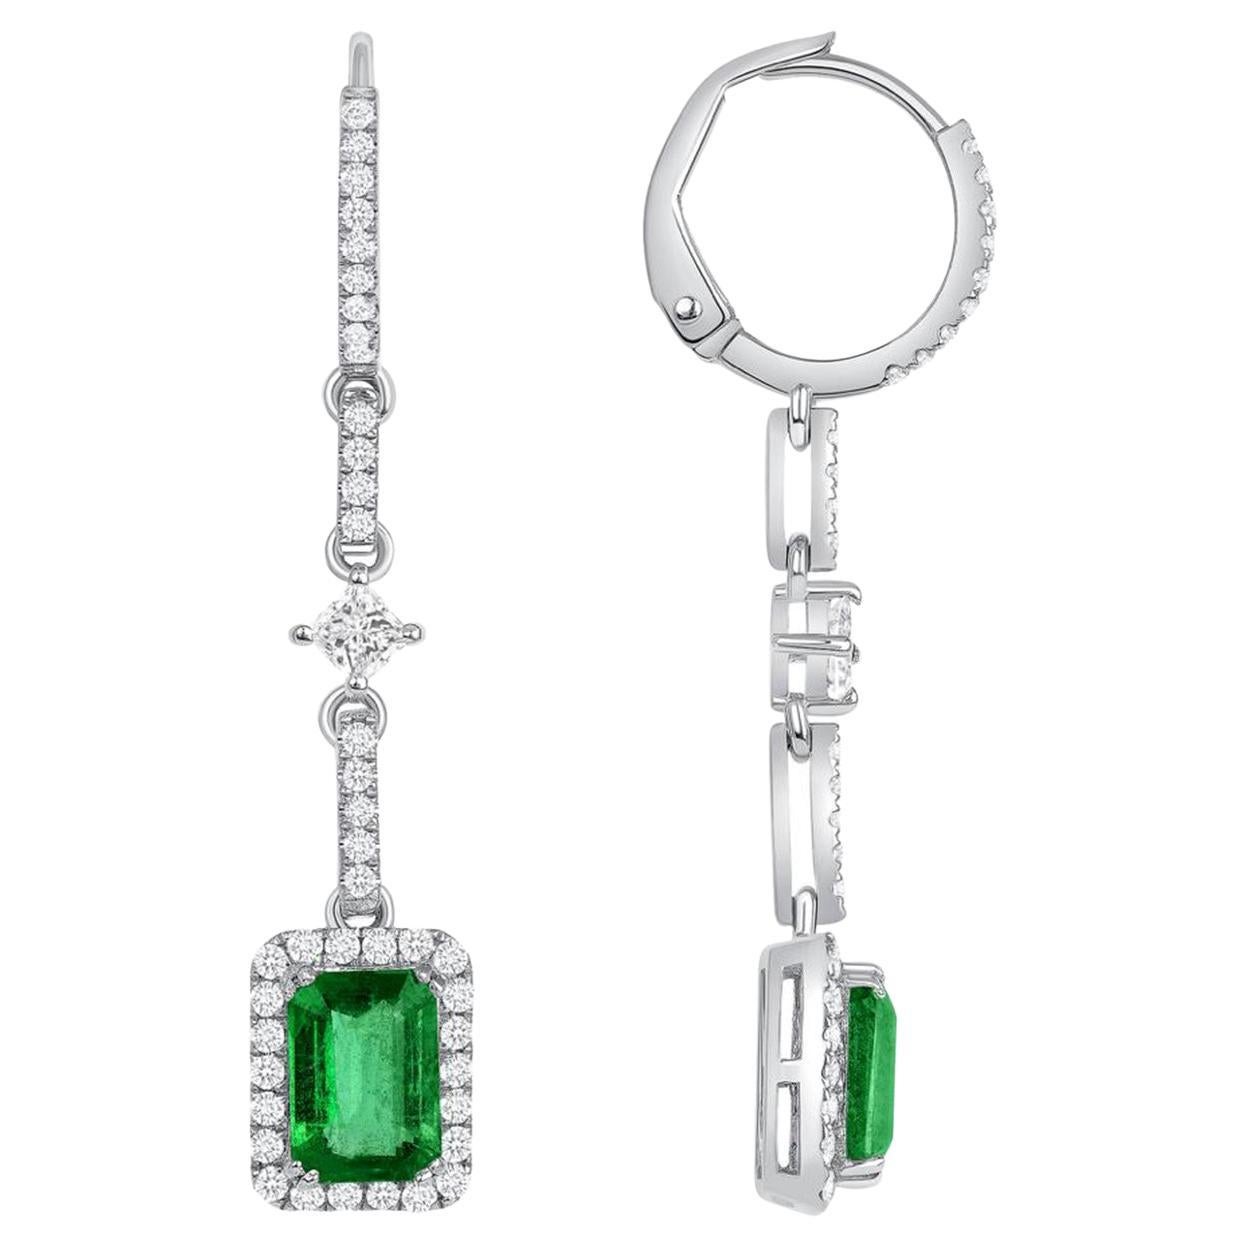 1.77 Ct Natural Colombian Emerald 0.78 Ct Diamonds 18K White Gold Drop Earrings For Sale